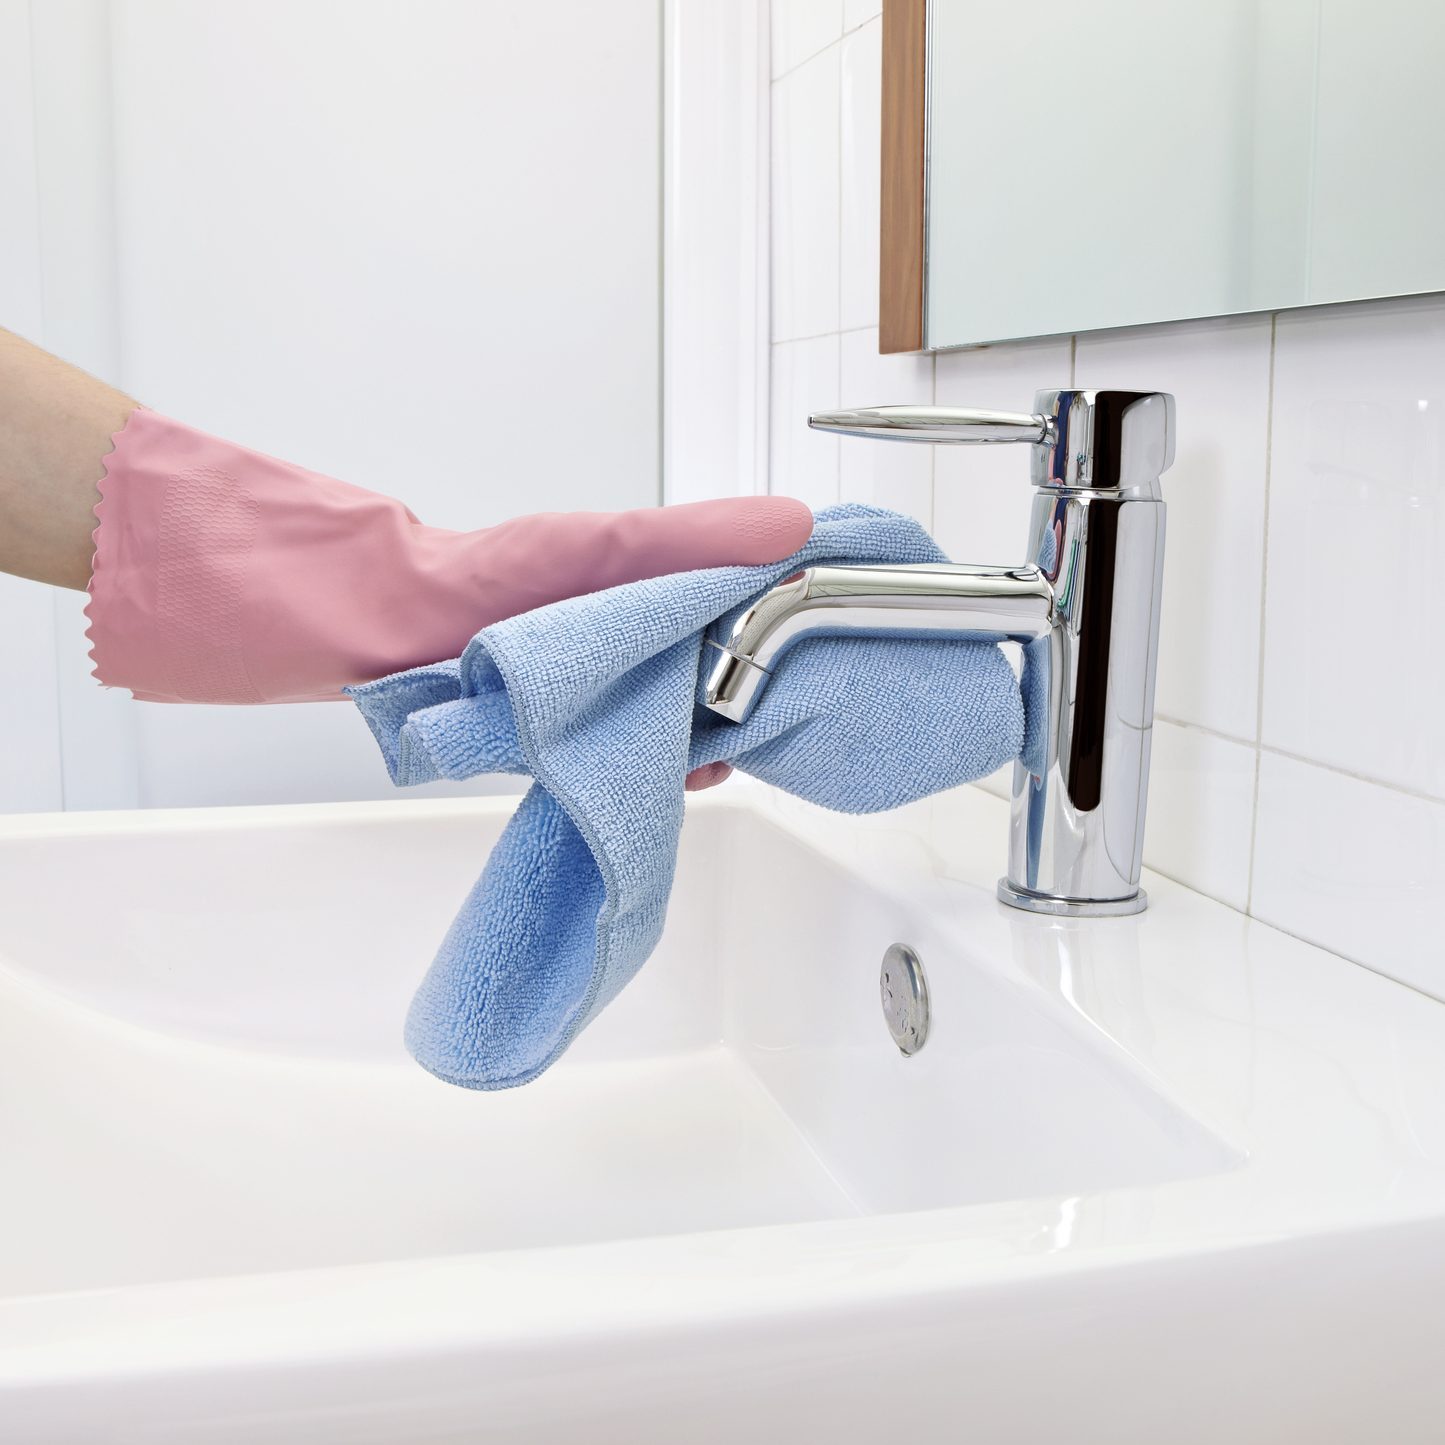 How to Clean a Microfiber Cloth Properly